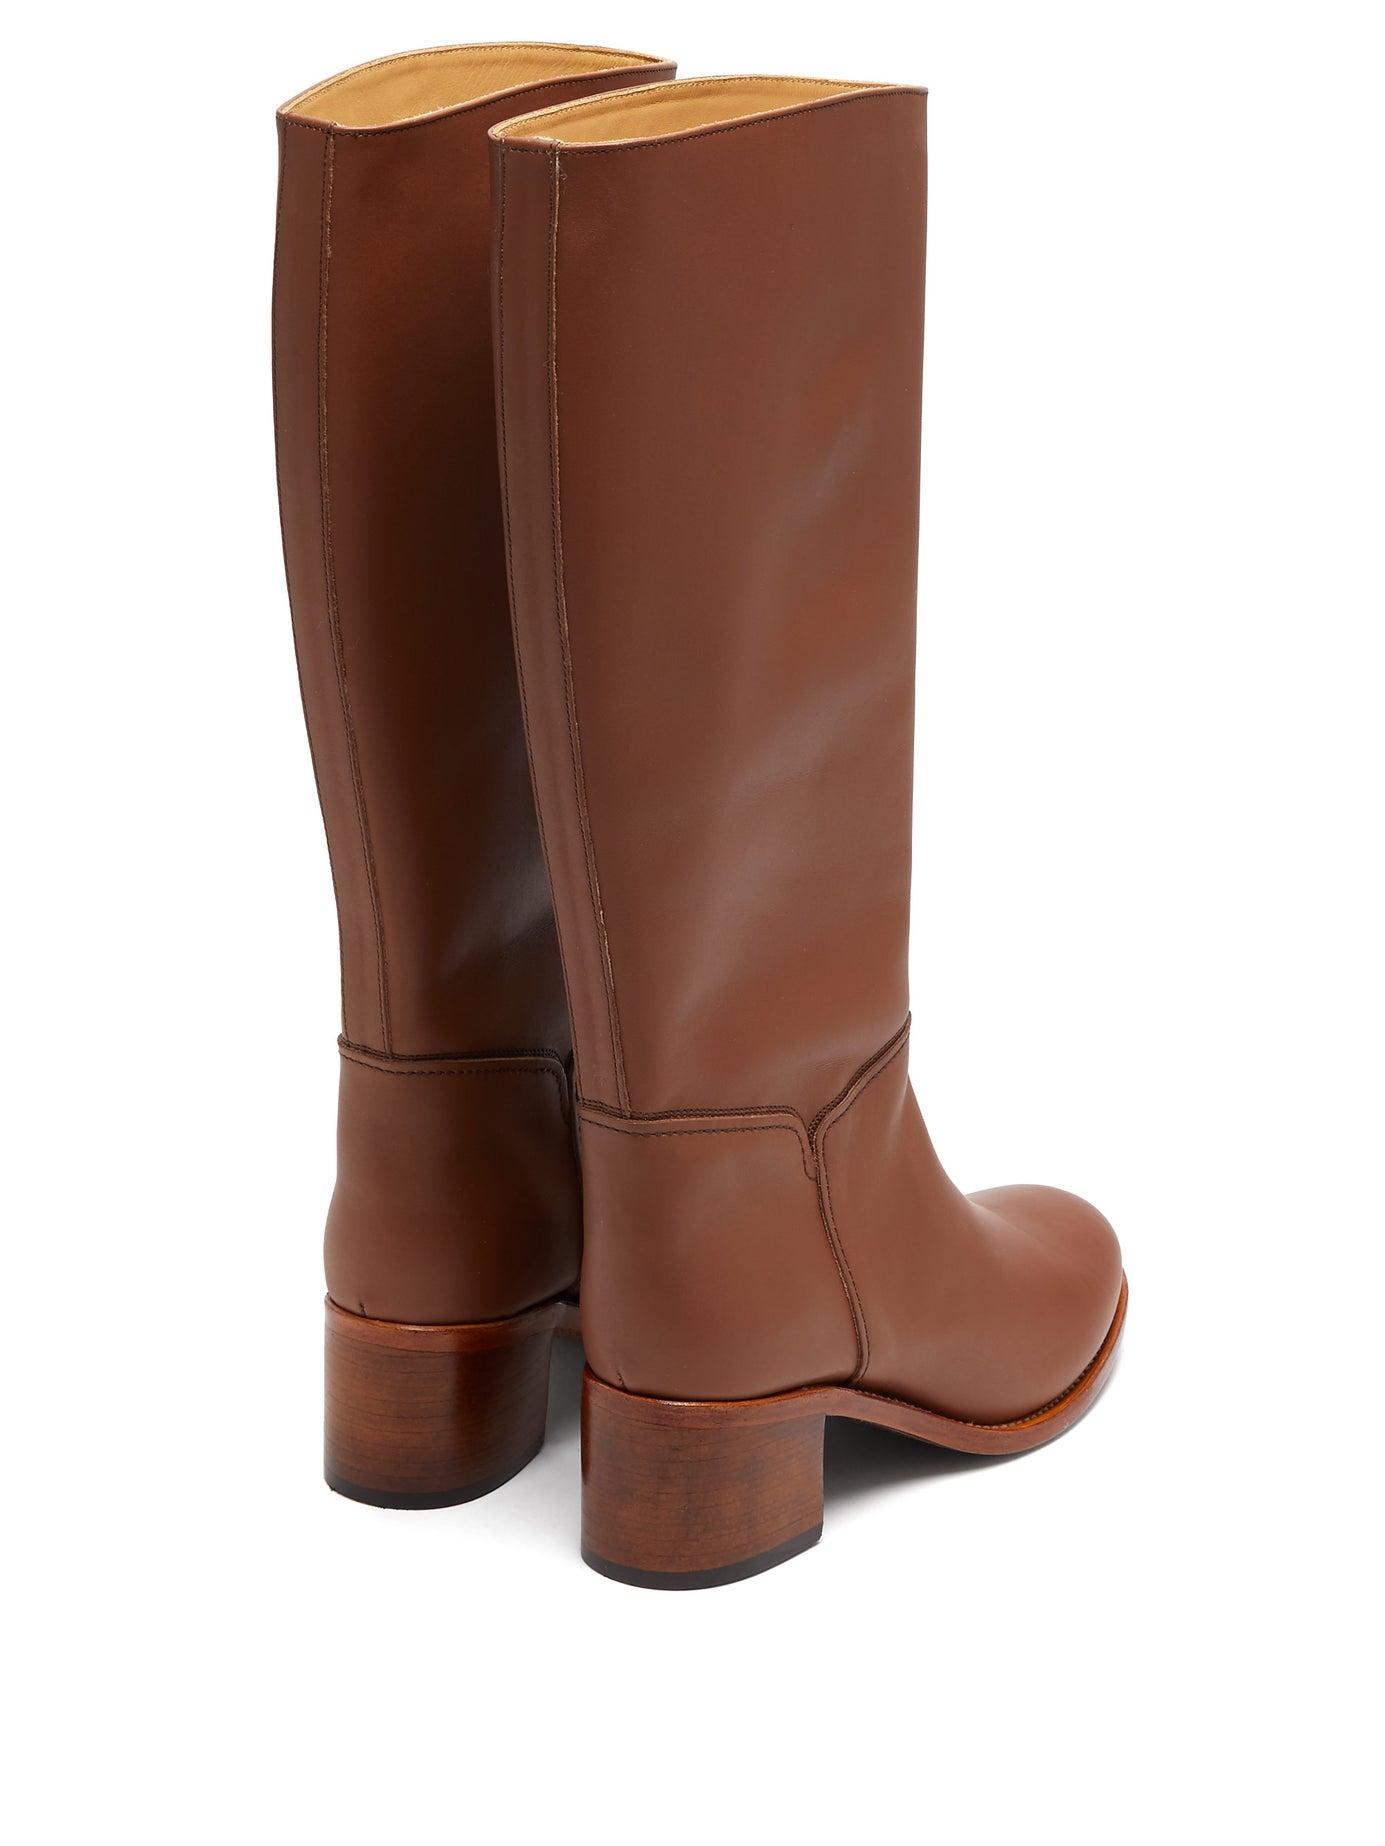 A.P.C. Iris Knee-high Leather Boots in Brown | Lyst